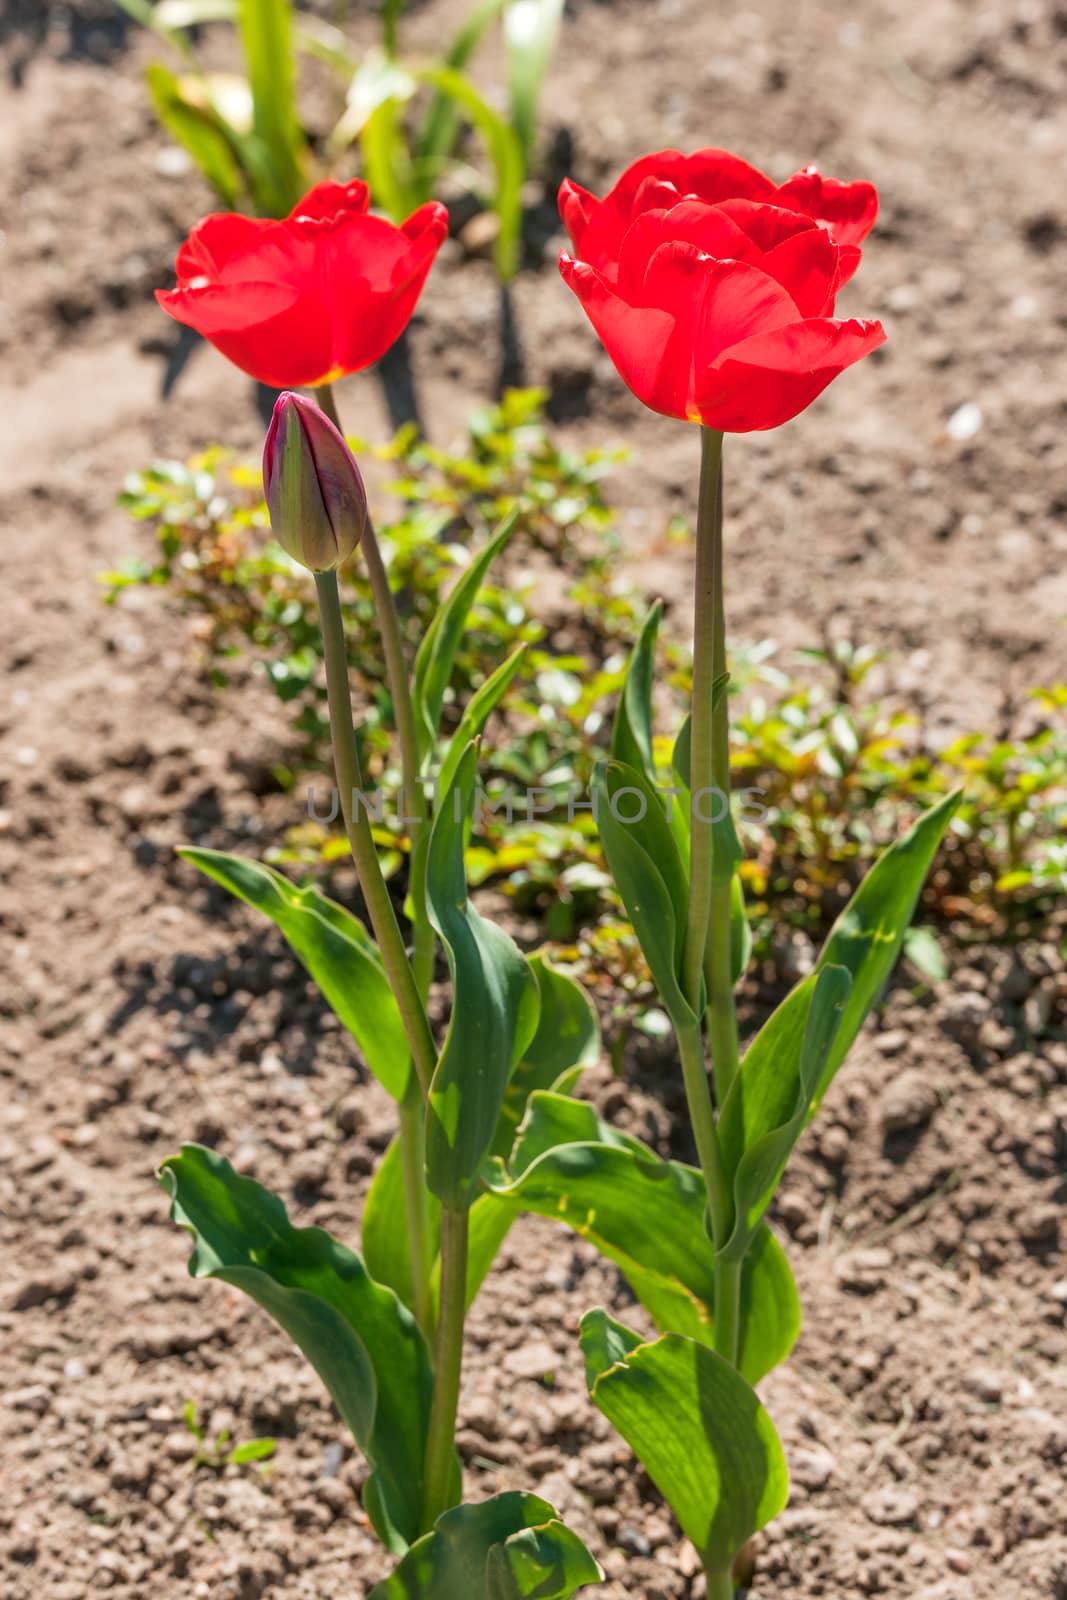 Two red tulip flowers in a garden